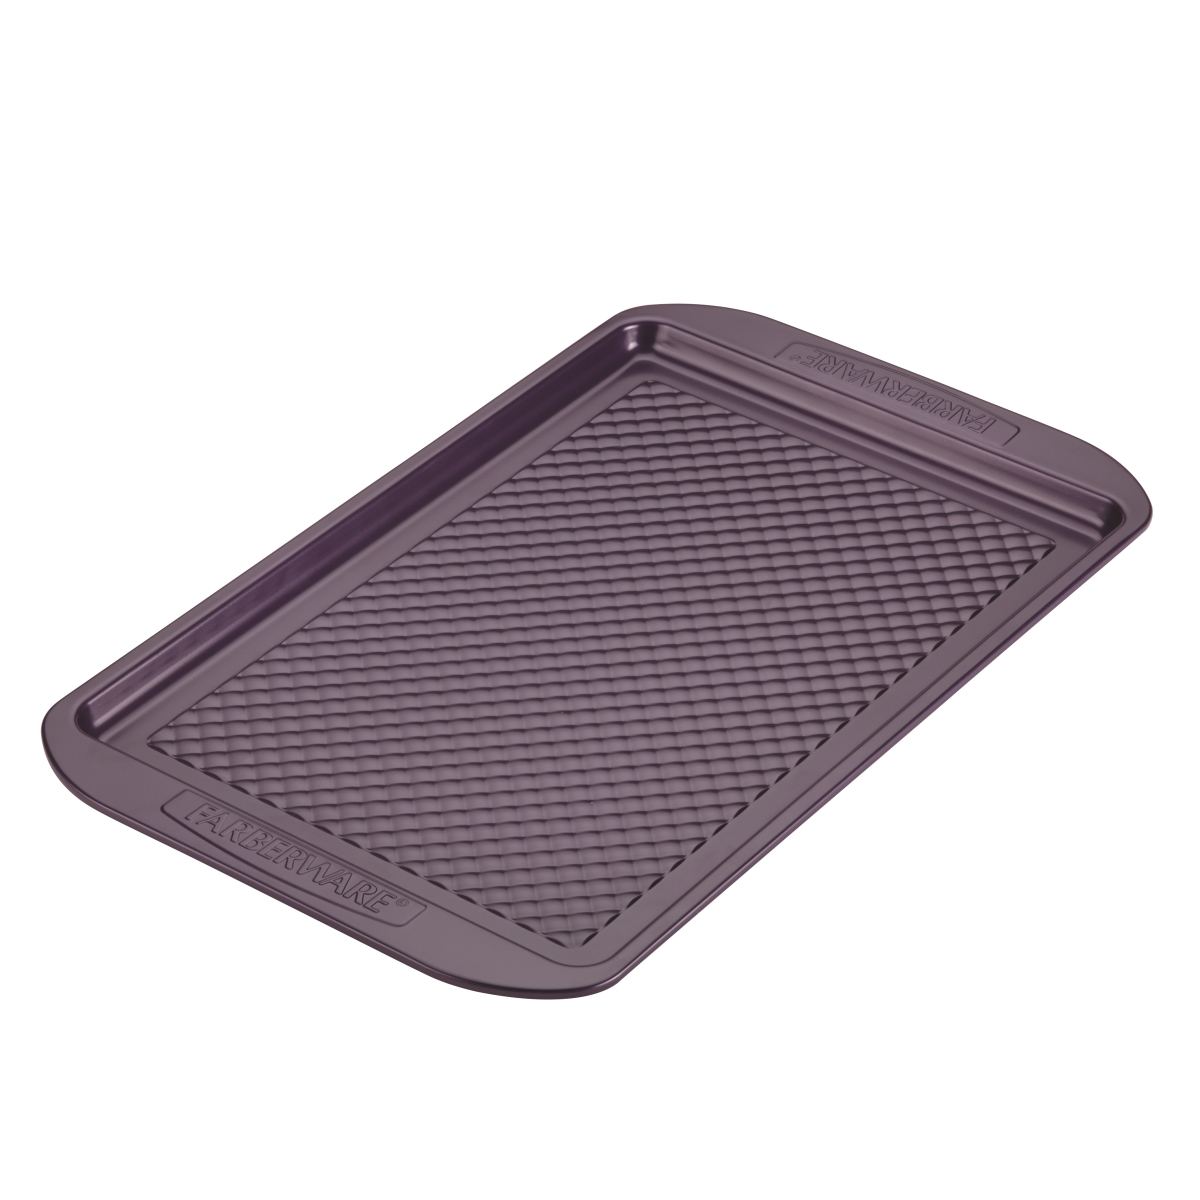 47138 Colorvive Nonstick Cookie Pan, Purple - 11 X 17 In.